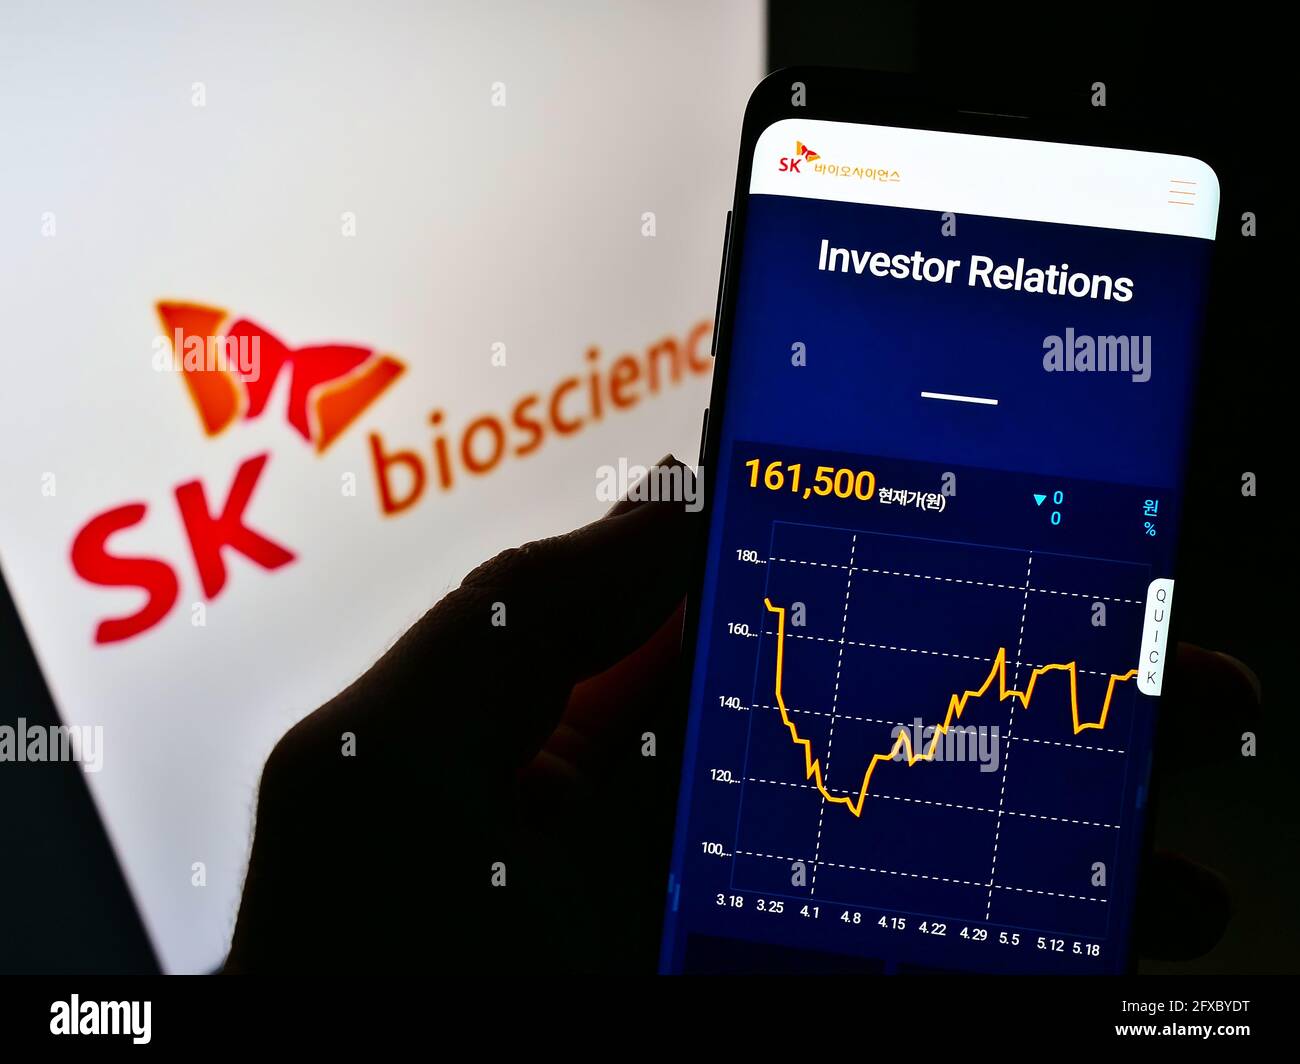 Person holding cellphone with webpage of South Korean biological company SK Bioscience on screen with logo. Focus on center of phone display. Stock Photo